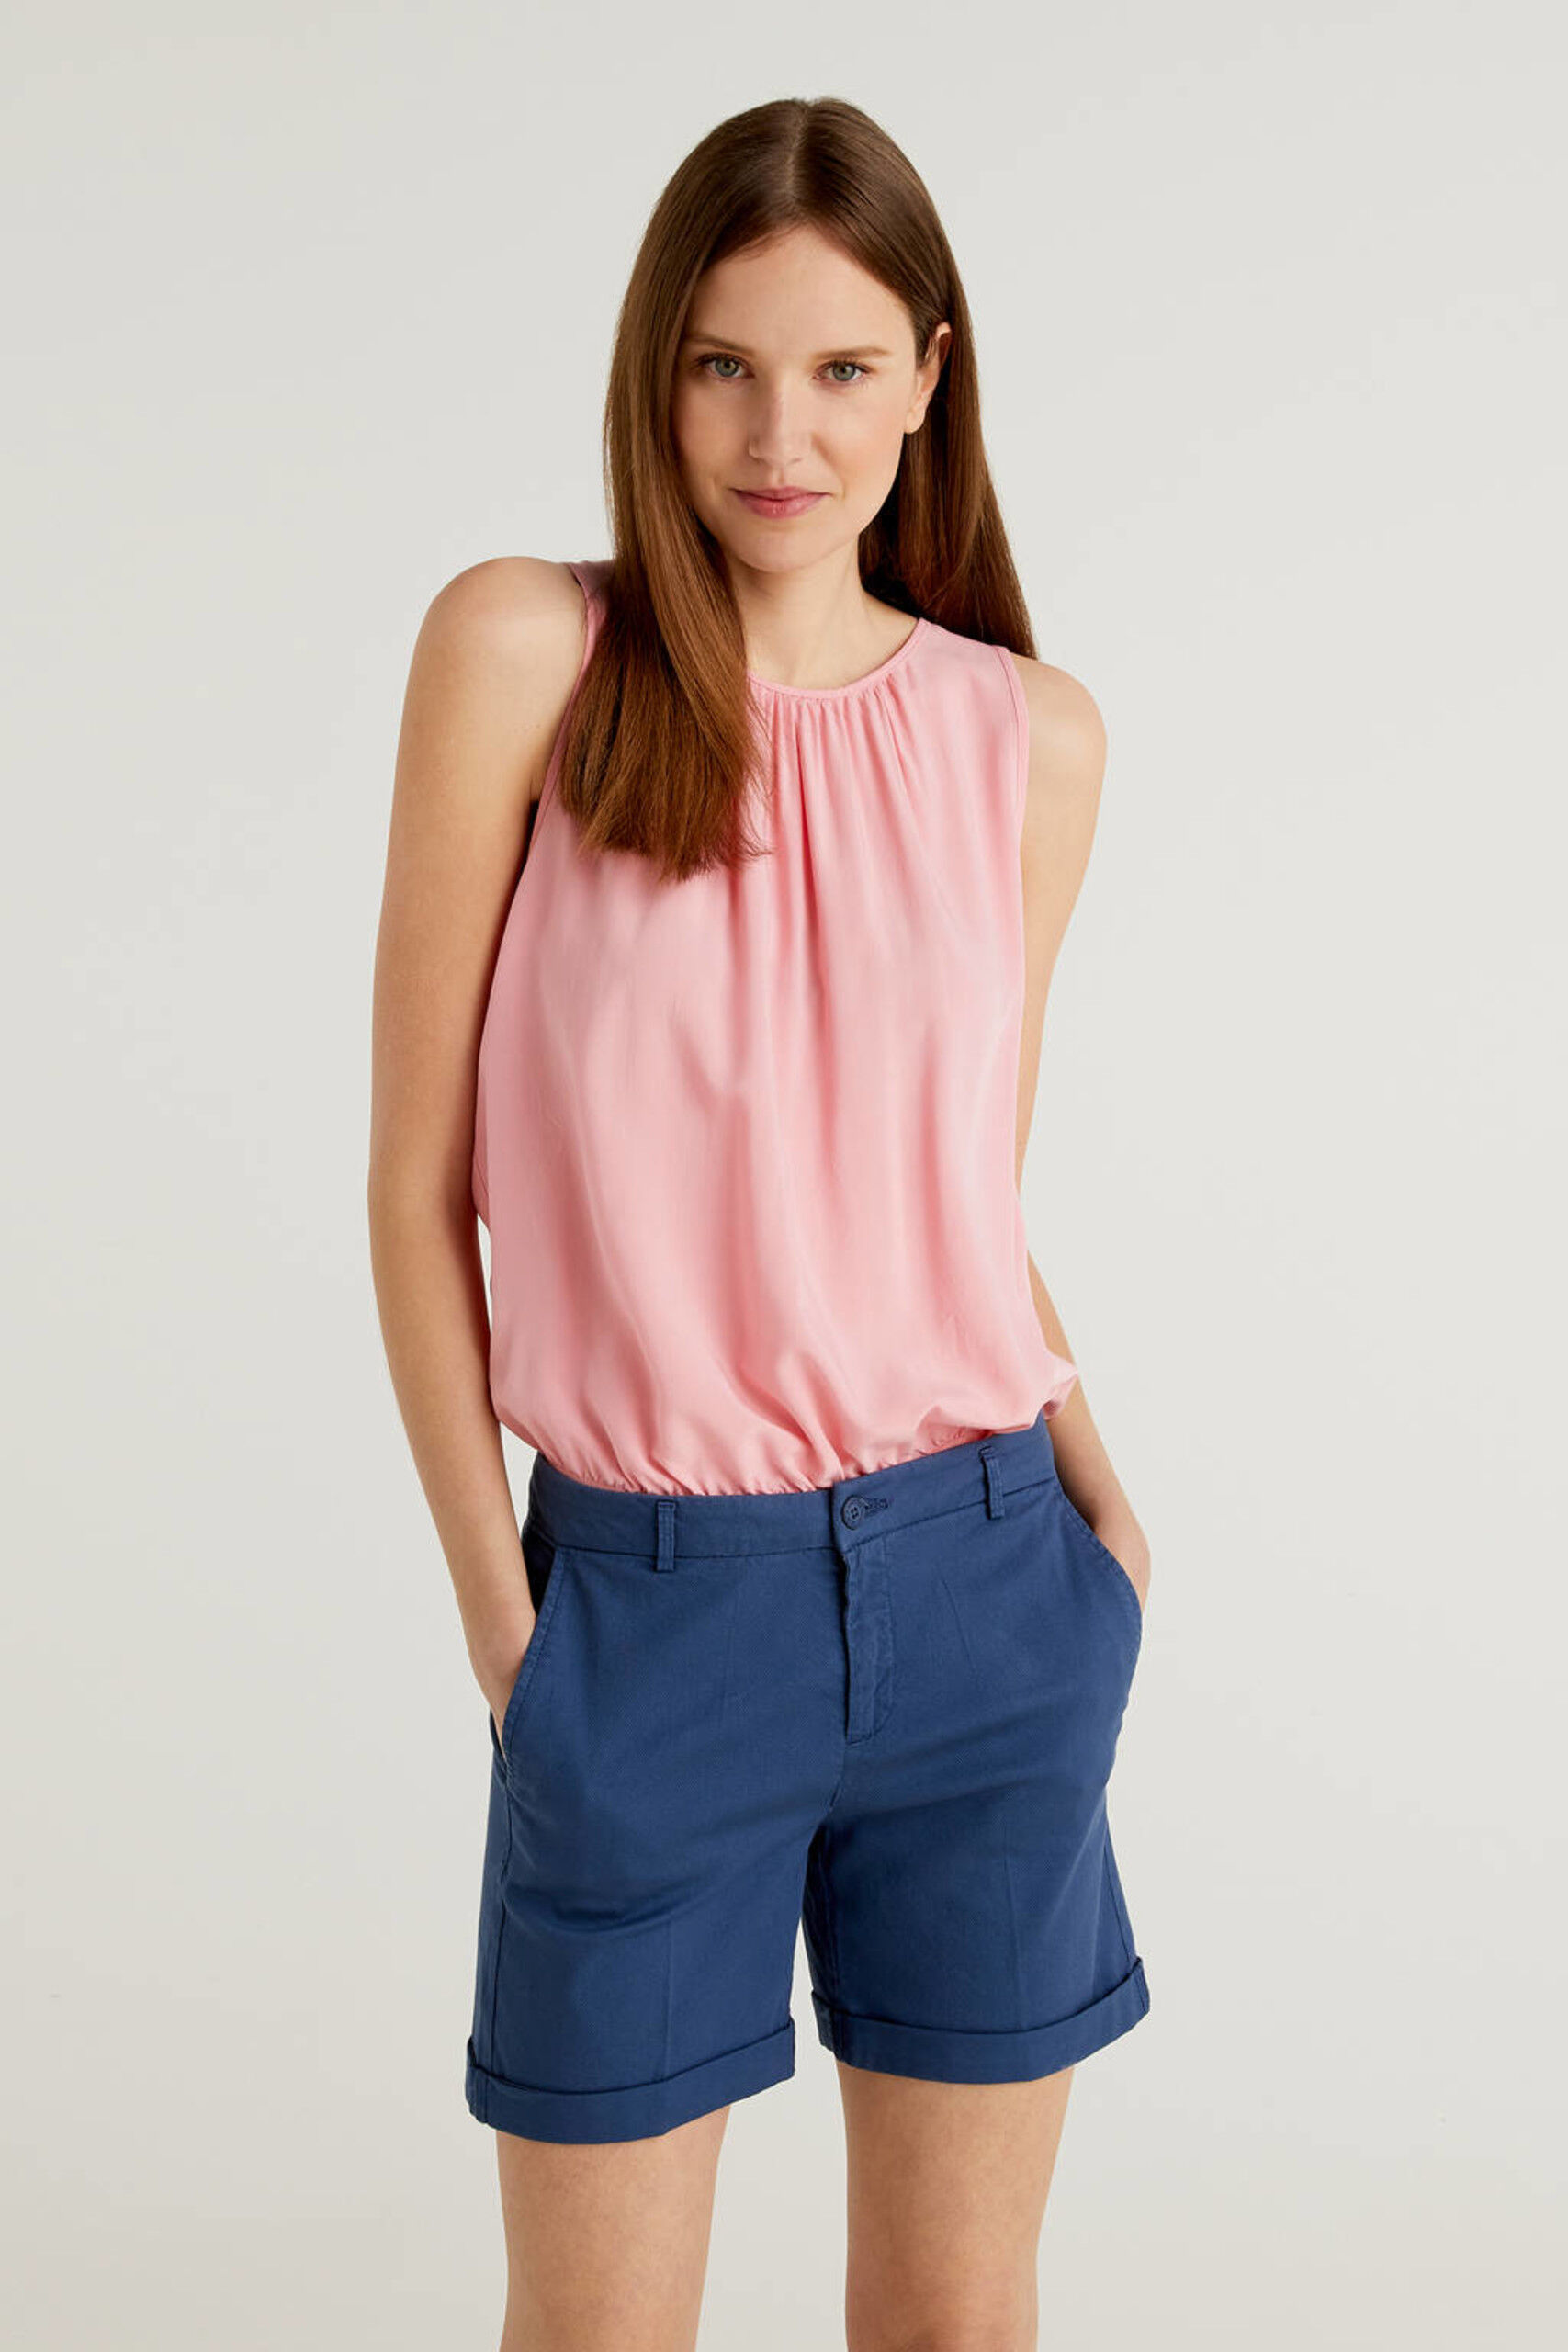 Women's Shirts and Blouses Sale Collection 2021 | Benetton